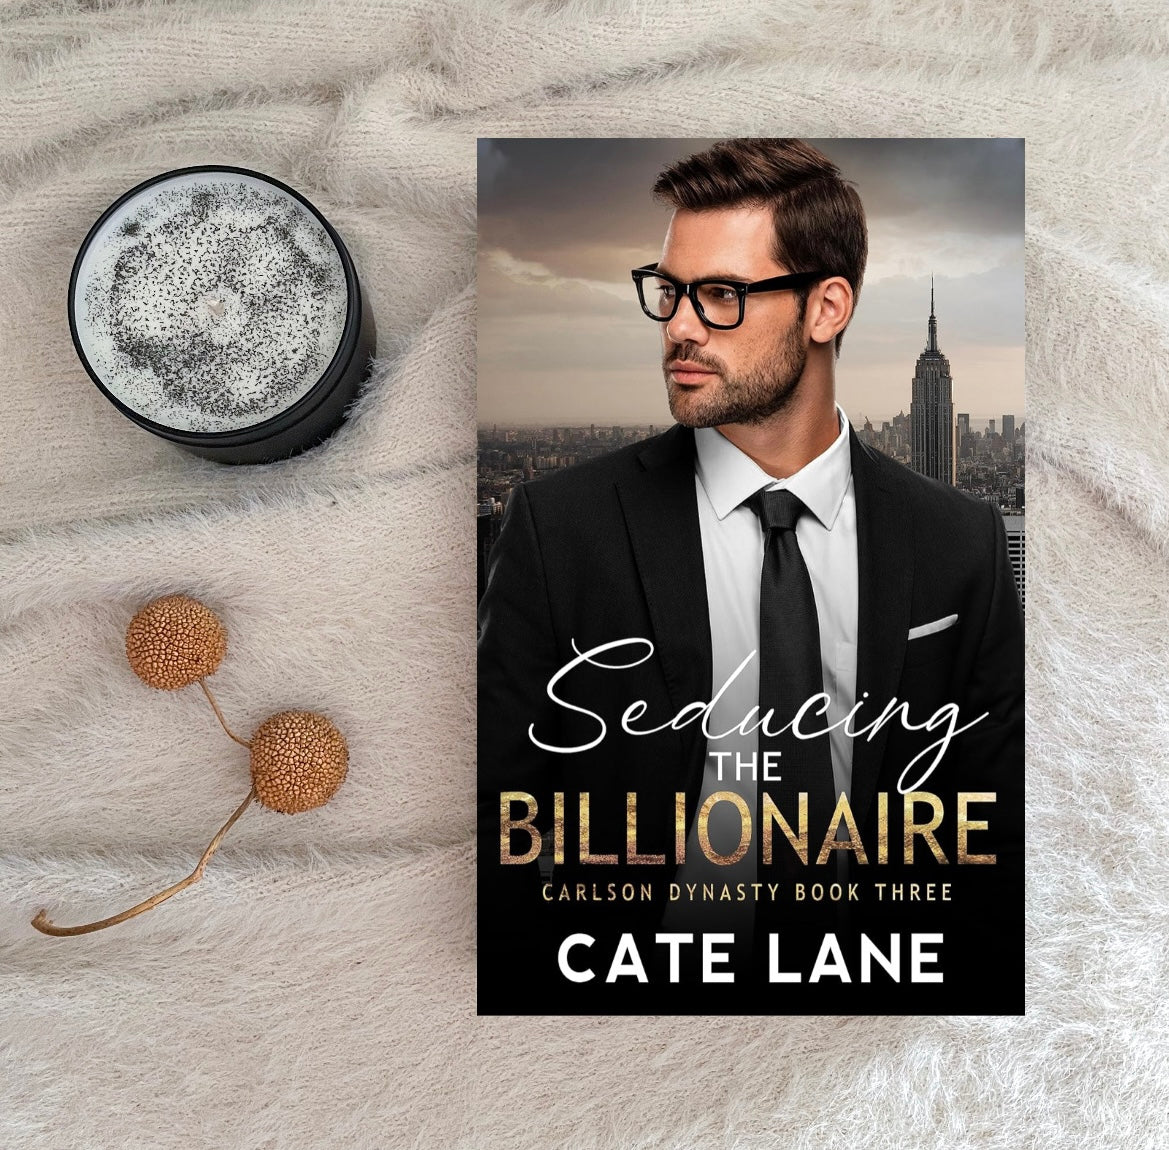 The Carlson Dynasty series by Cate Lane